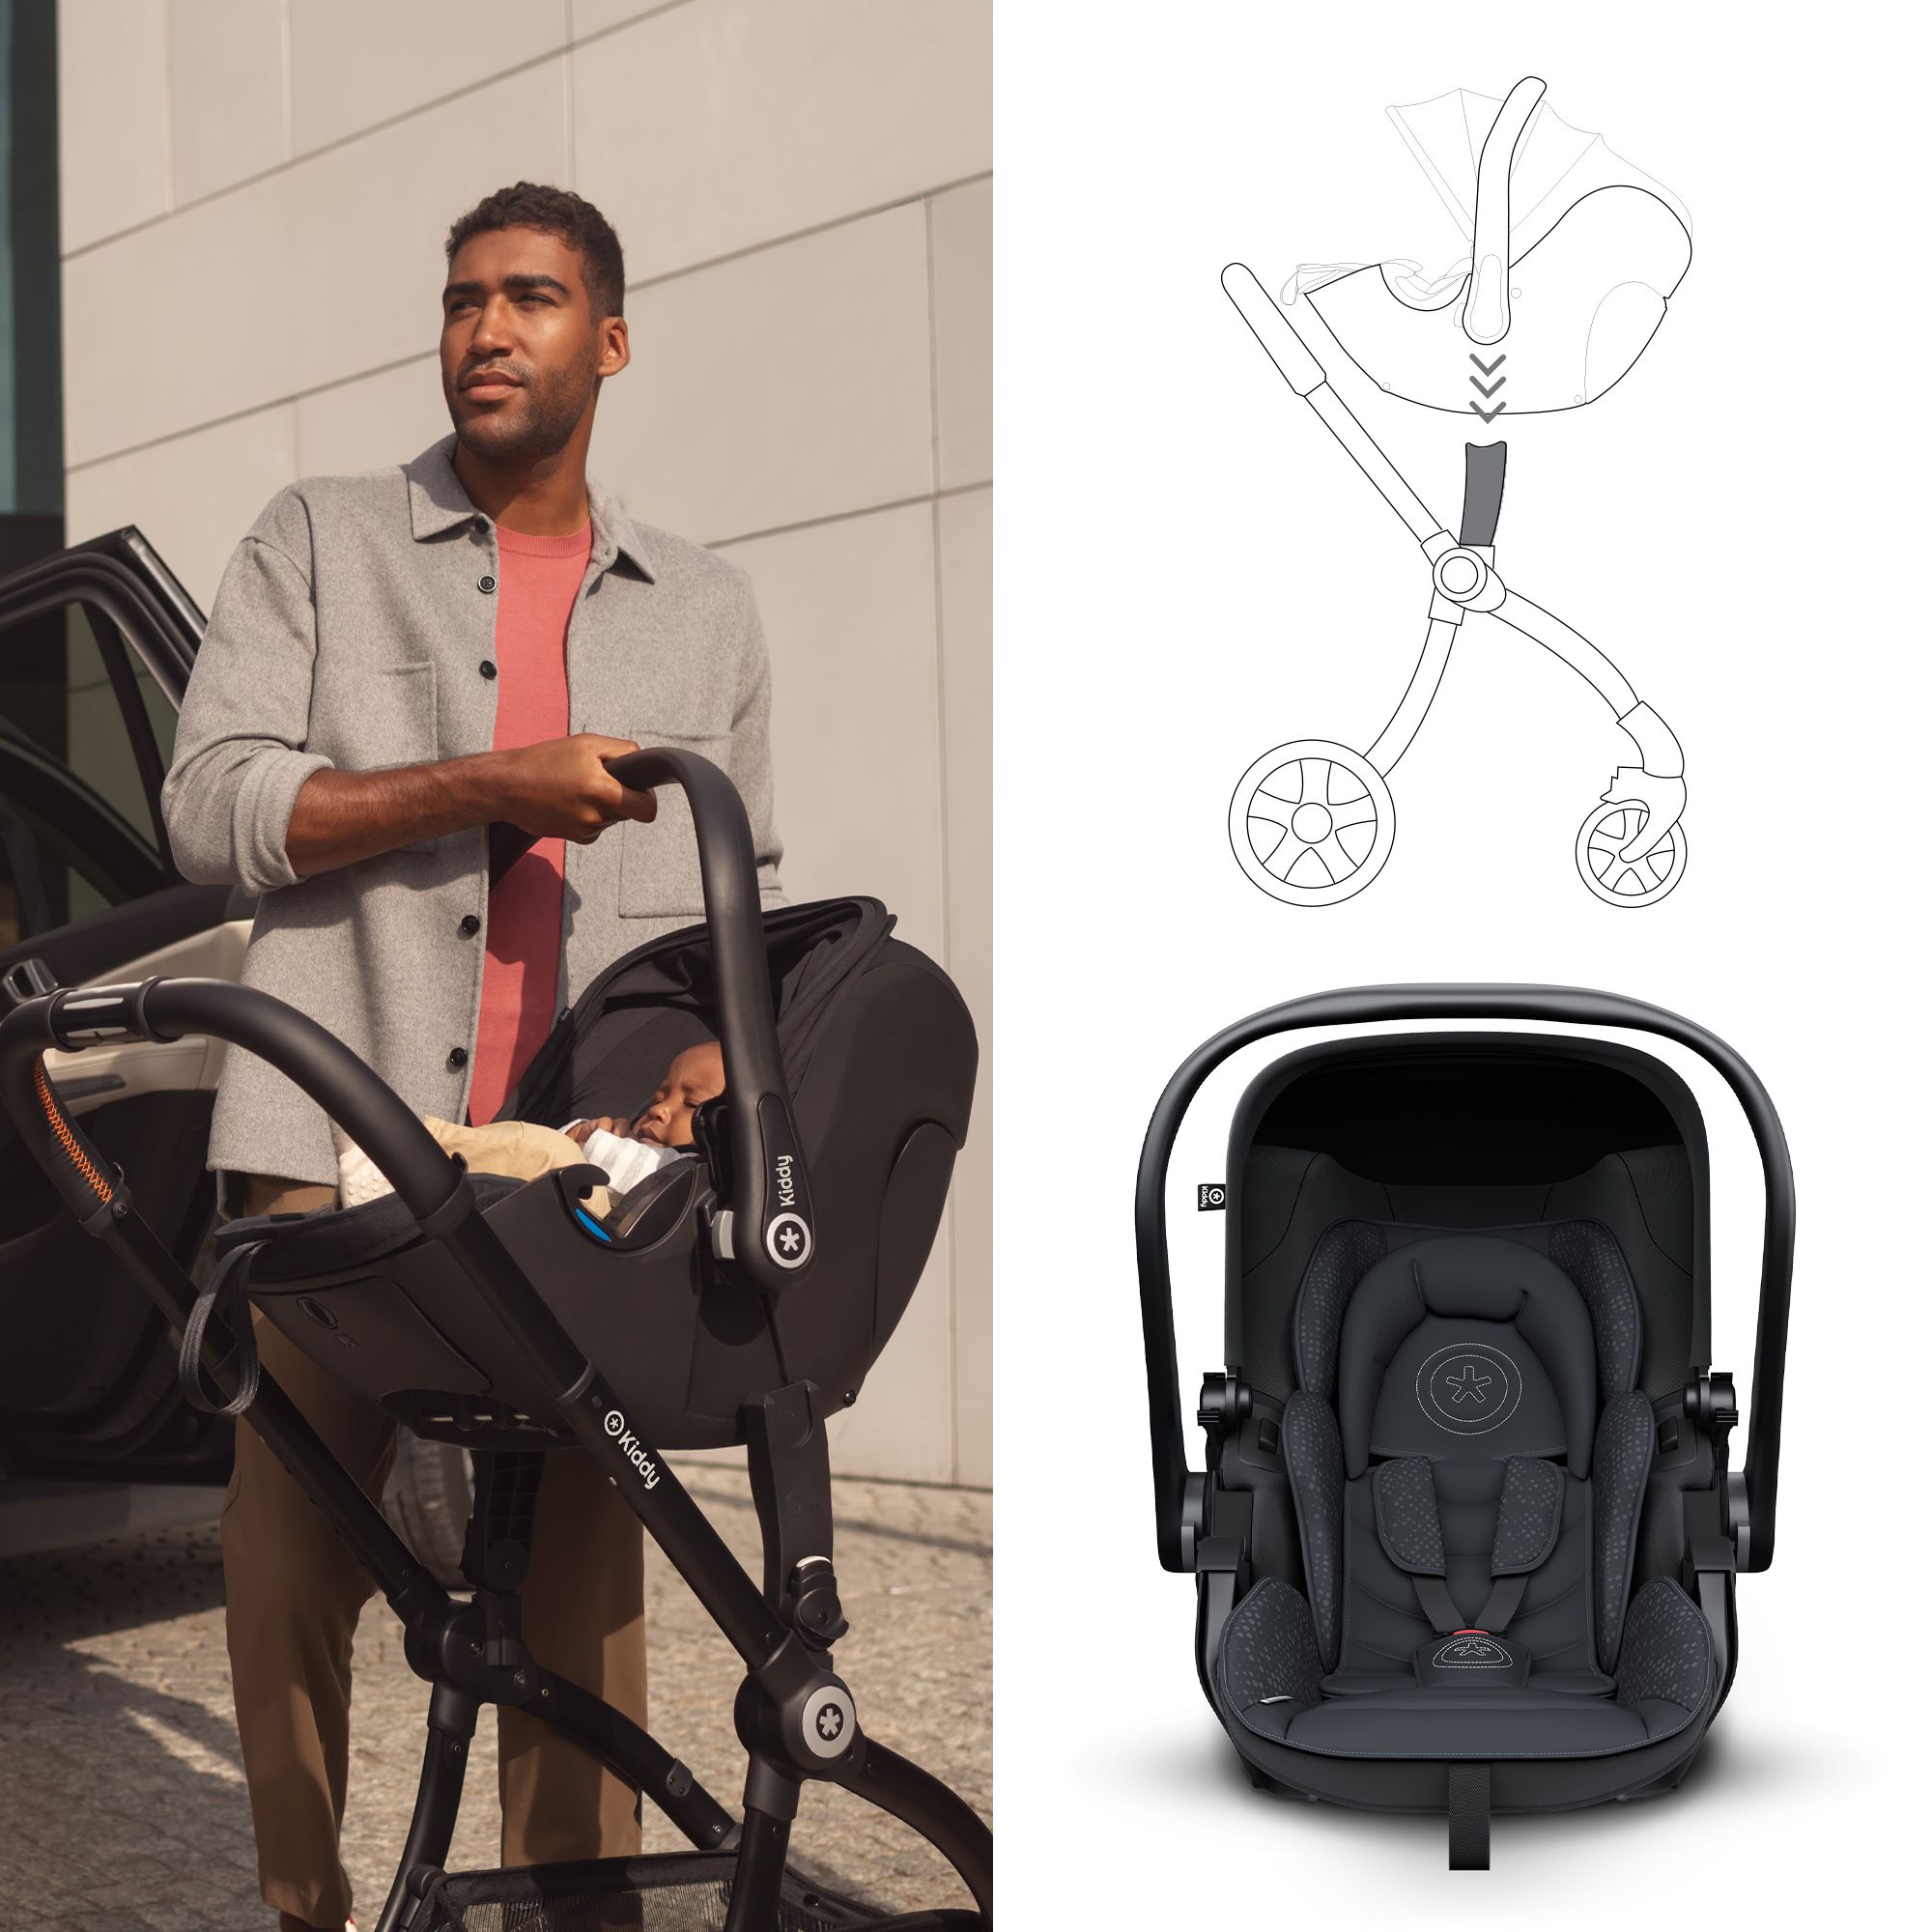 An alternative to the carrycot